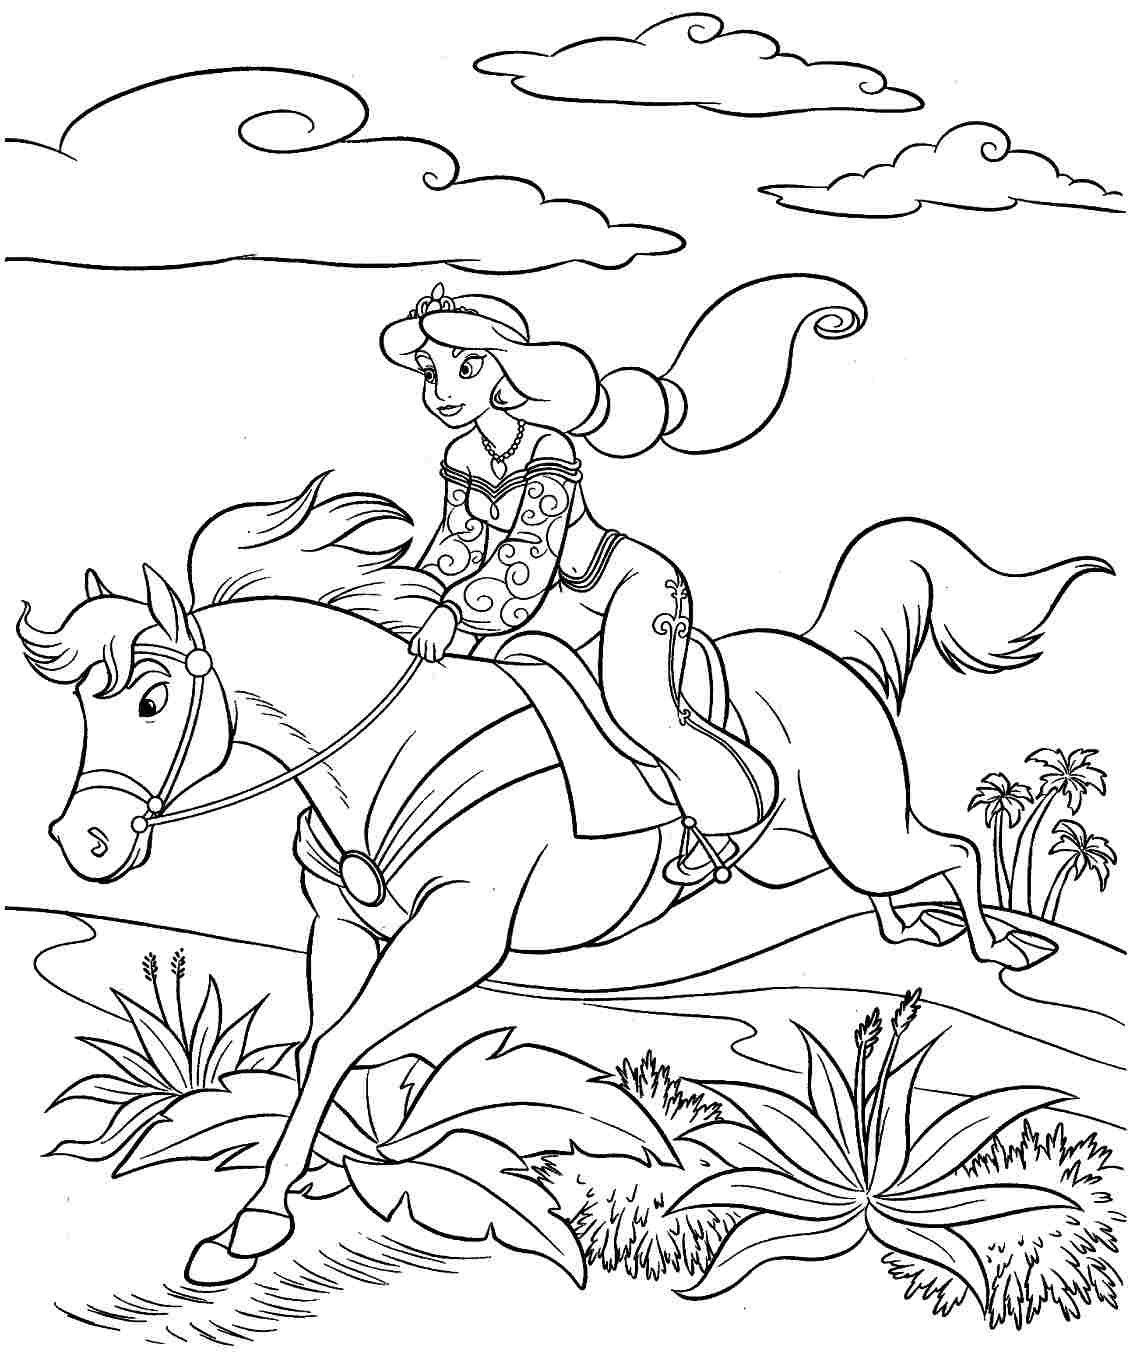 Princess Horse Coloring Pages – From the thousands of pictures on the net  regarding princess… | Horse coloring pages, Princess coloring pages, Disney  coloring pages